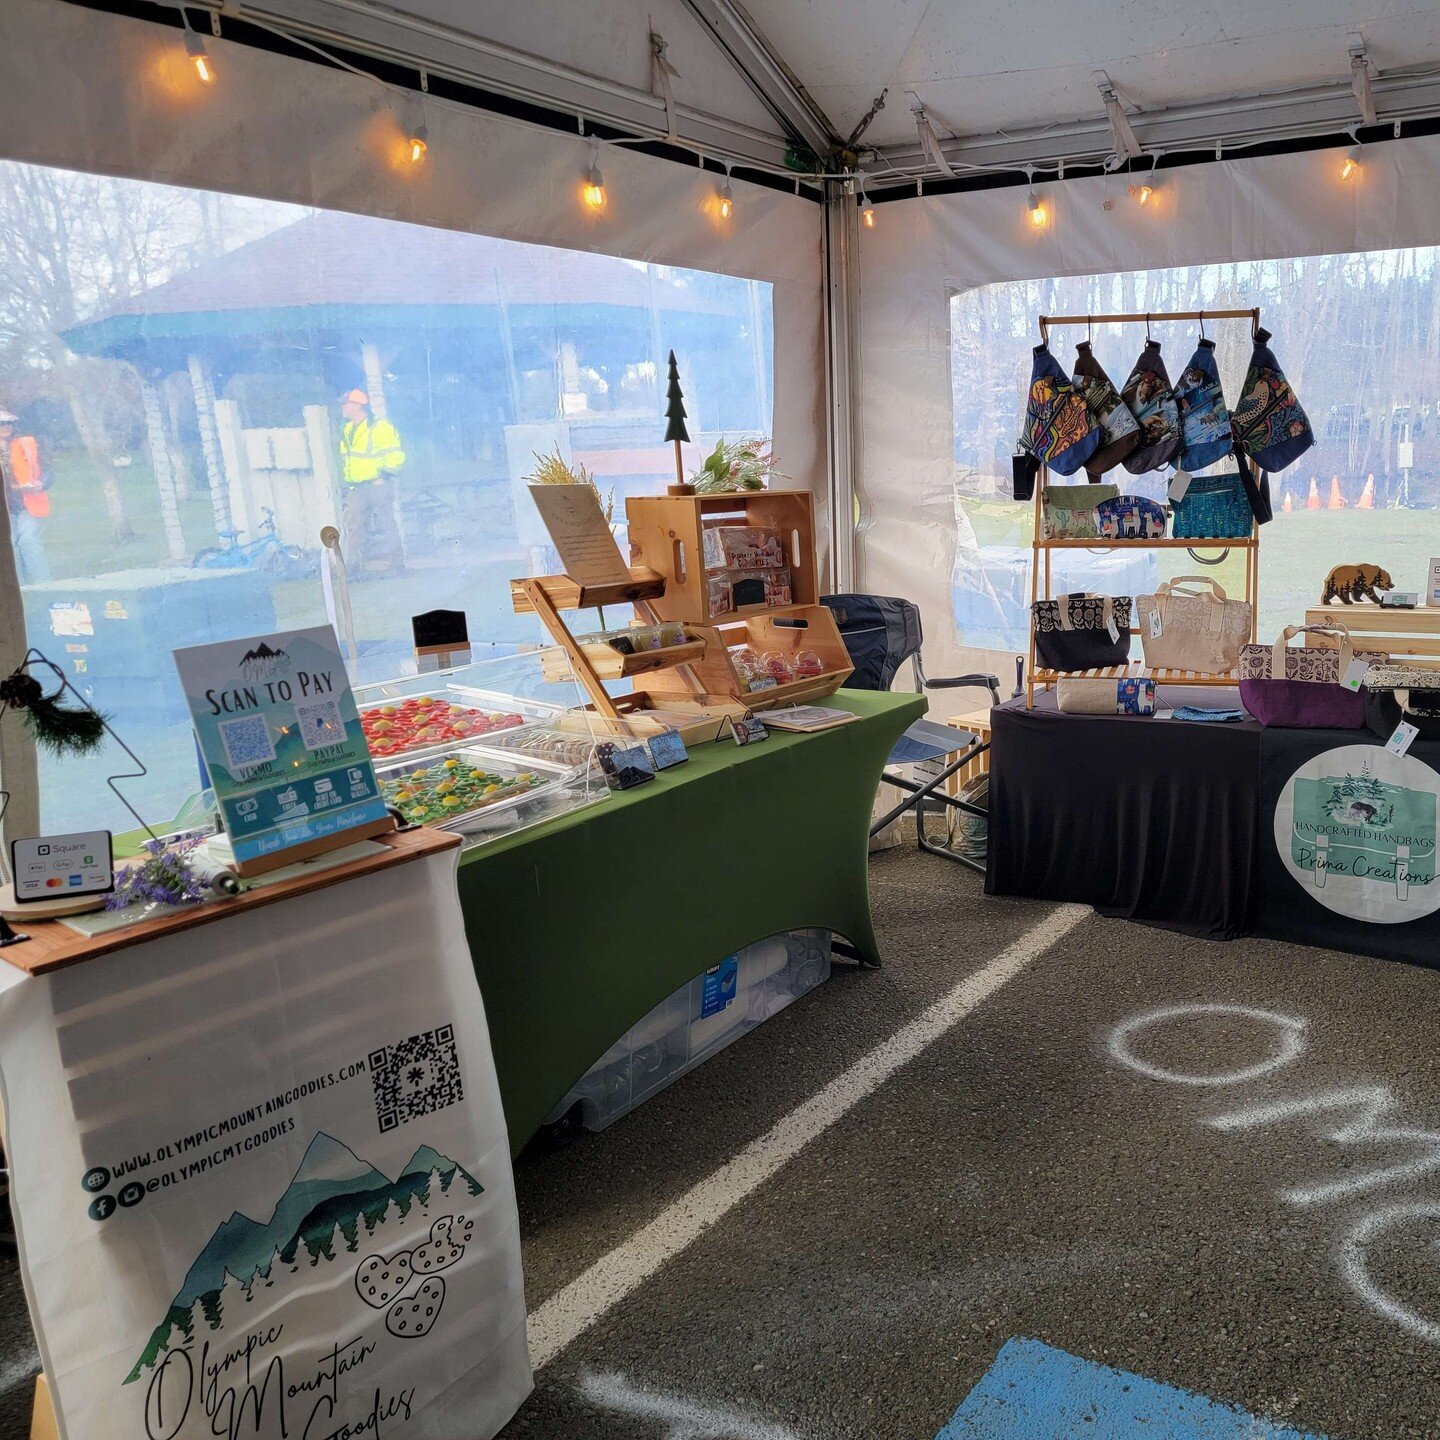 🍪🌞 Exciting News! 🌞🍯
Hey cookie lovers! 🎉 Olympic Mountain Cookies is thrilled to be at the Sunshine Festival today until 7pm! Come by our booth and indulge in our delightful sugar cookies - they're sure to brighten your day! But wait, there's m